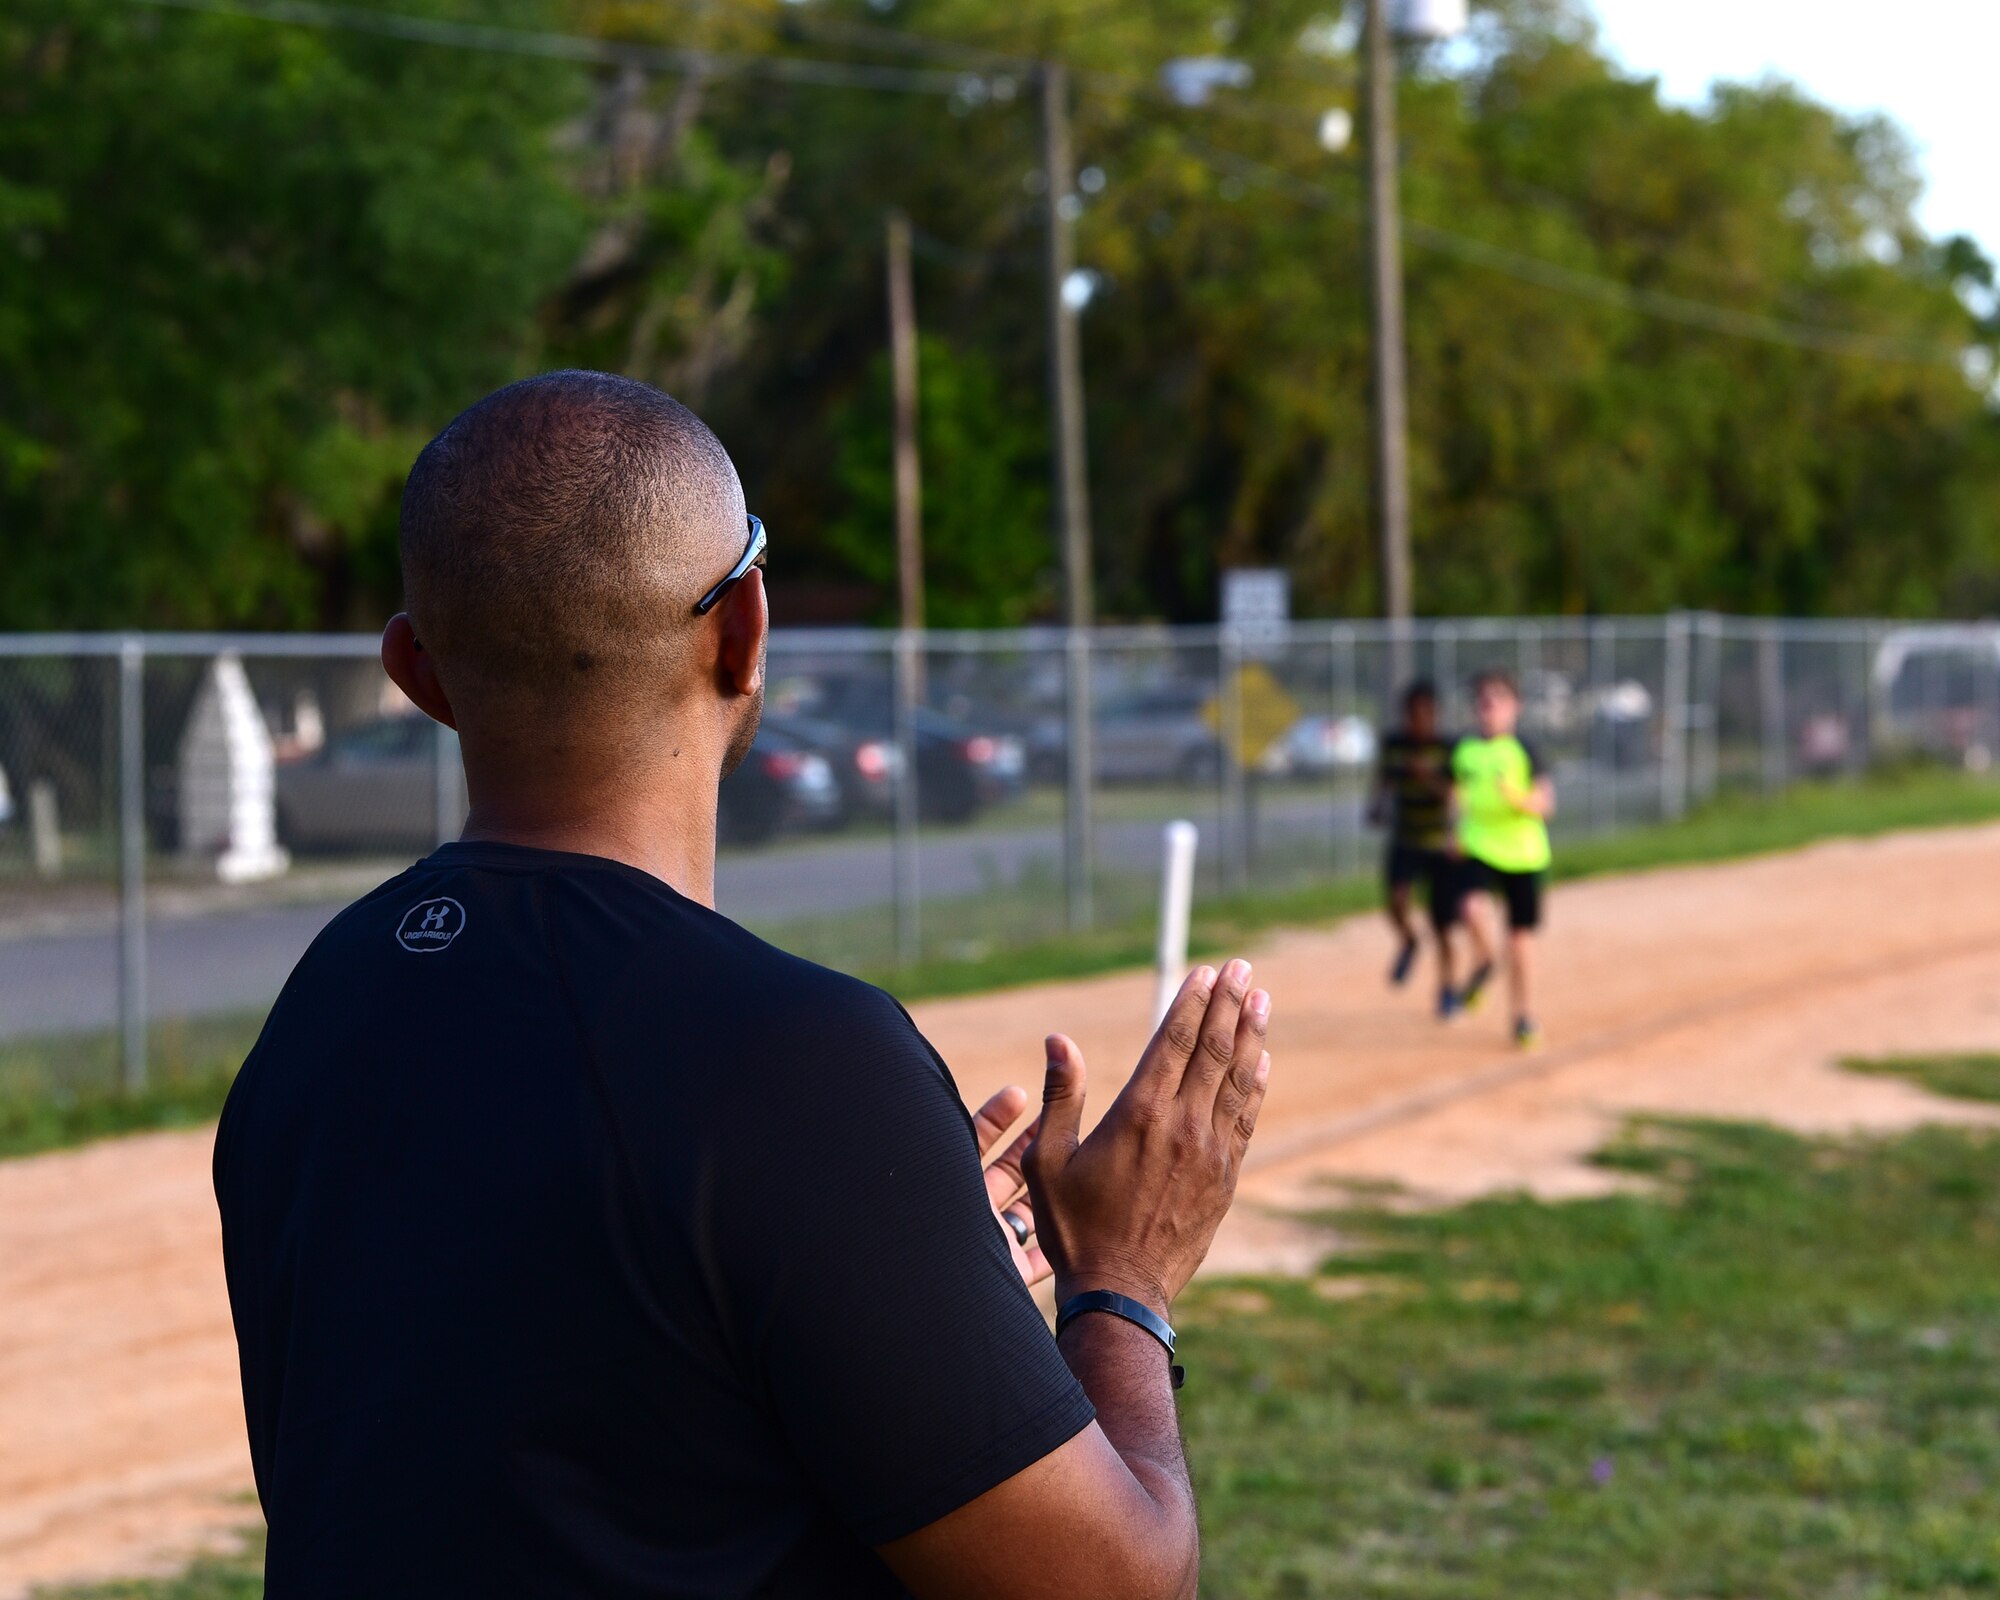 U.S. Air Force Senior Master Sgt. Antonio Mack, 325th Fighter Wing Air Forces Northern/Tyndall Command Center and 325th Fighter Wing Staff Agency superintendent, encourages his athletes to finish a lap around the track at Rutherford High School in Panama City, Fla., April 24, 2018. Mack said he believes sports are a positive influence for children and teach them both teamwork and resiliency in the face of hardship. (U.S. Air Force photo by Senior Airman Cody R. Miller/Released)